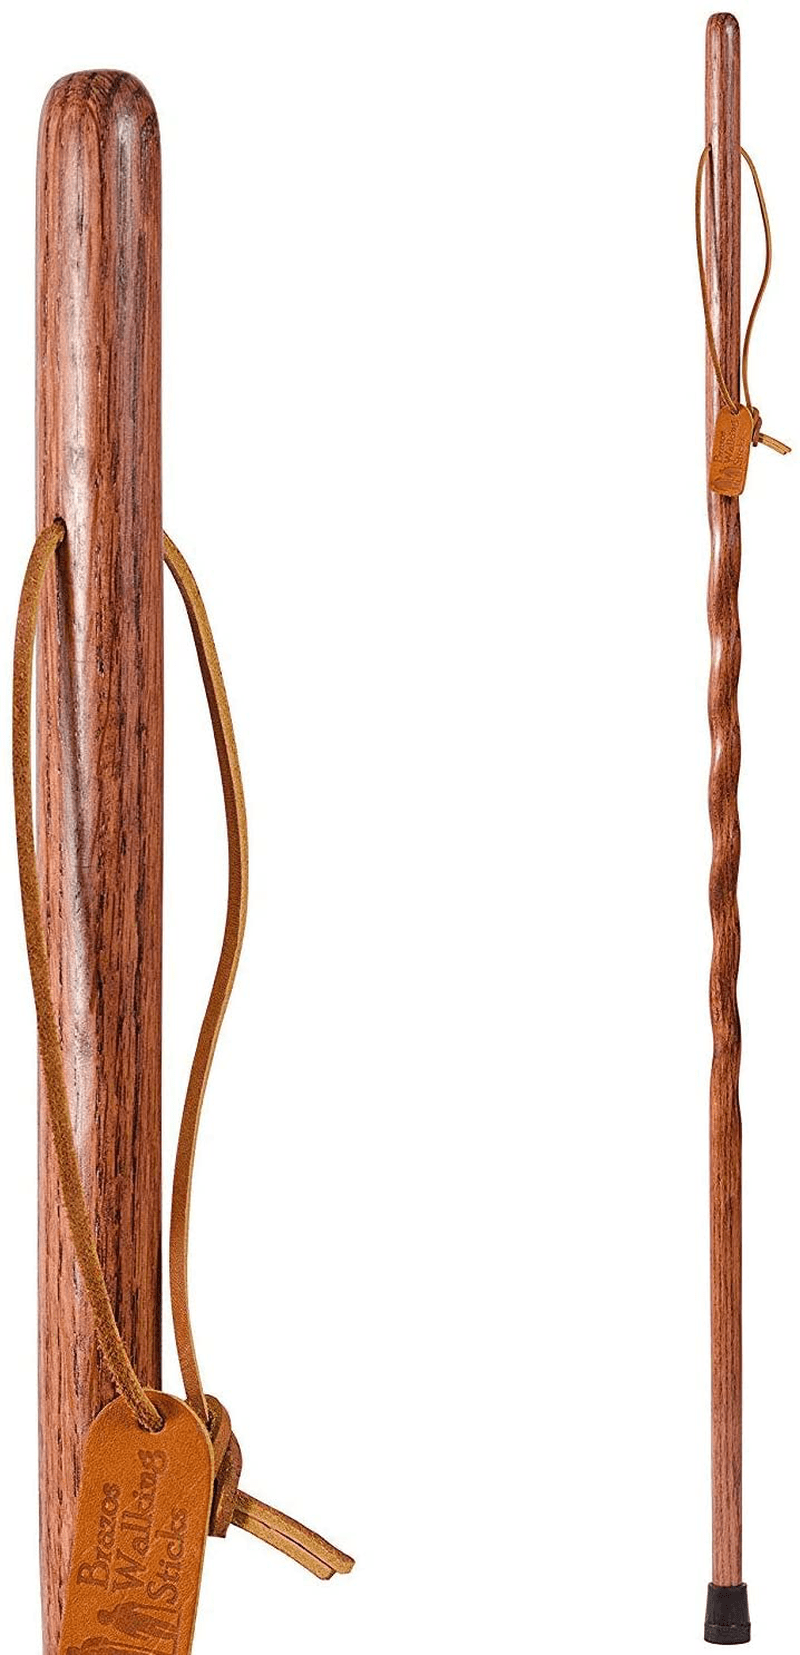 Brazos Oak Backpacker Walking Stick, Walking Sticks for Hiking, Hiking Sticks, Handcrafted Walking Sticks for Men and Women, Made in the USA, Red Oak, 48 Inches